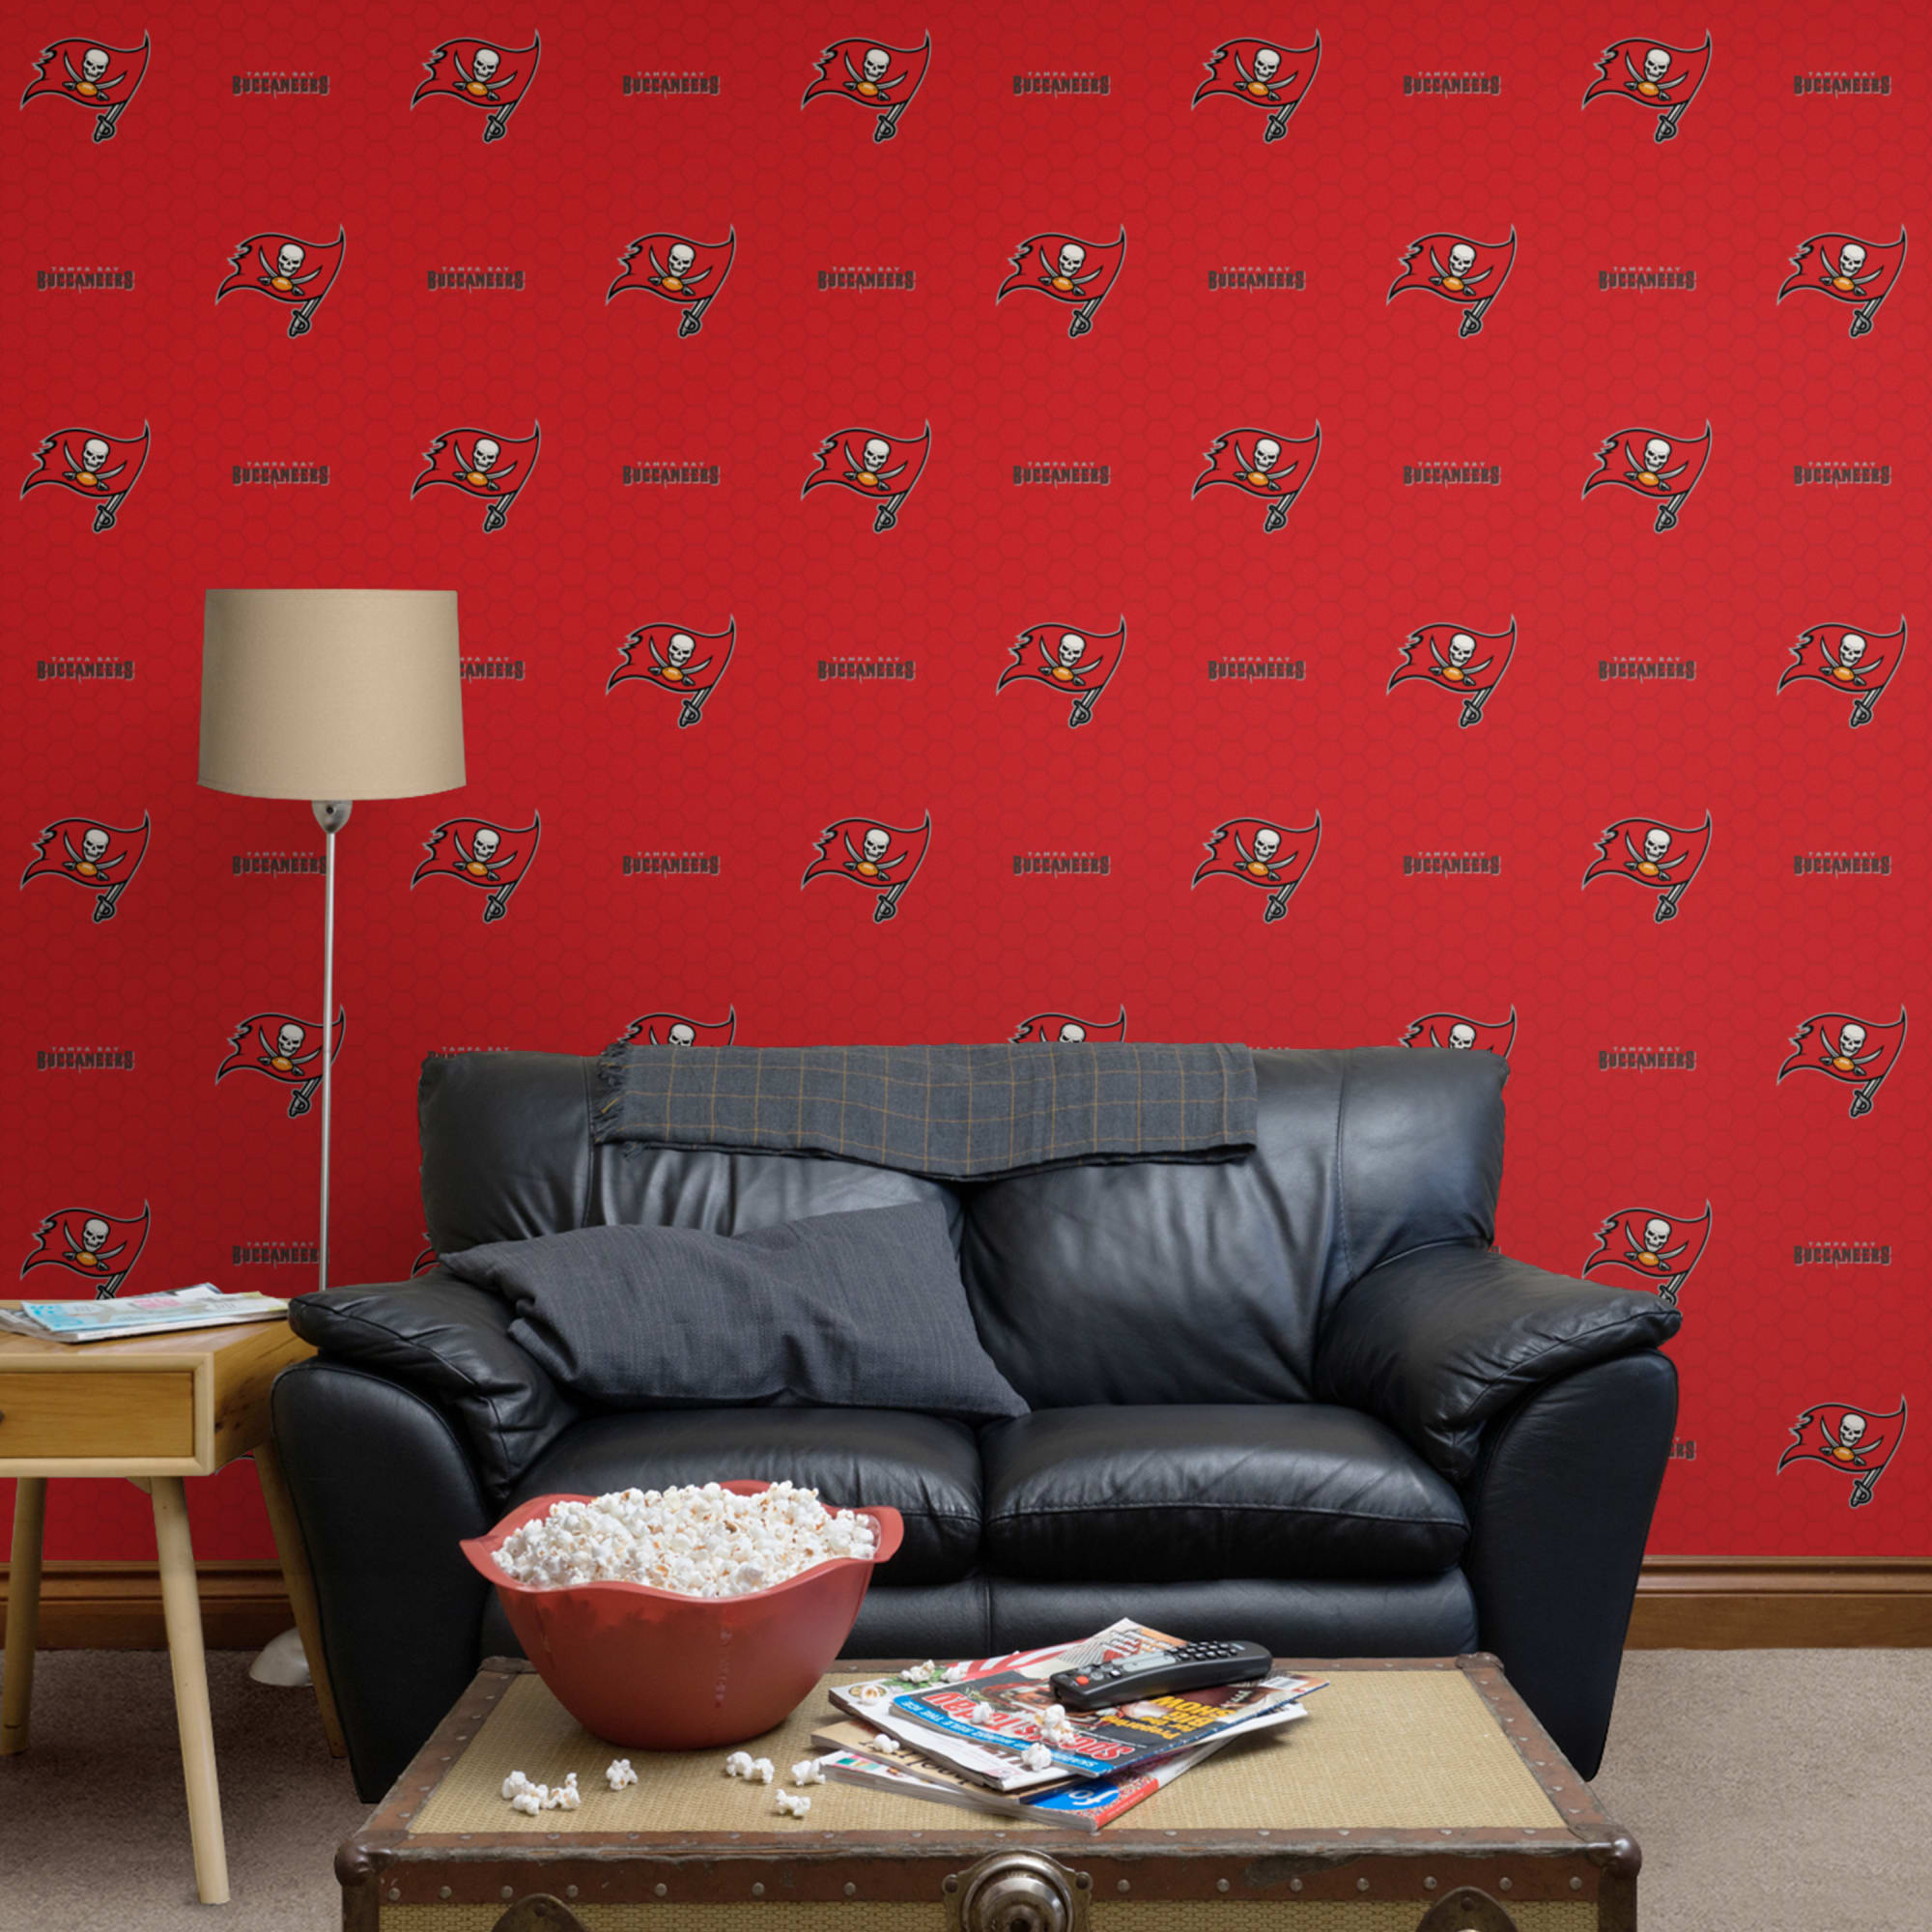 Tampa Bay Buccaneers: Logo Pattern - Officially Licensed NFL Removable Wallpaper 12" x 12" Sample by Fathead | 100% Vinyl